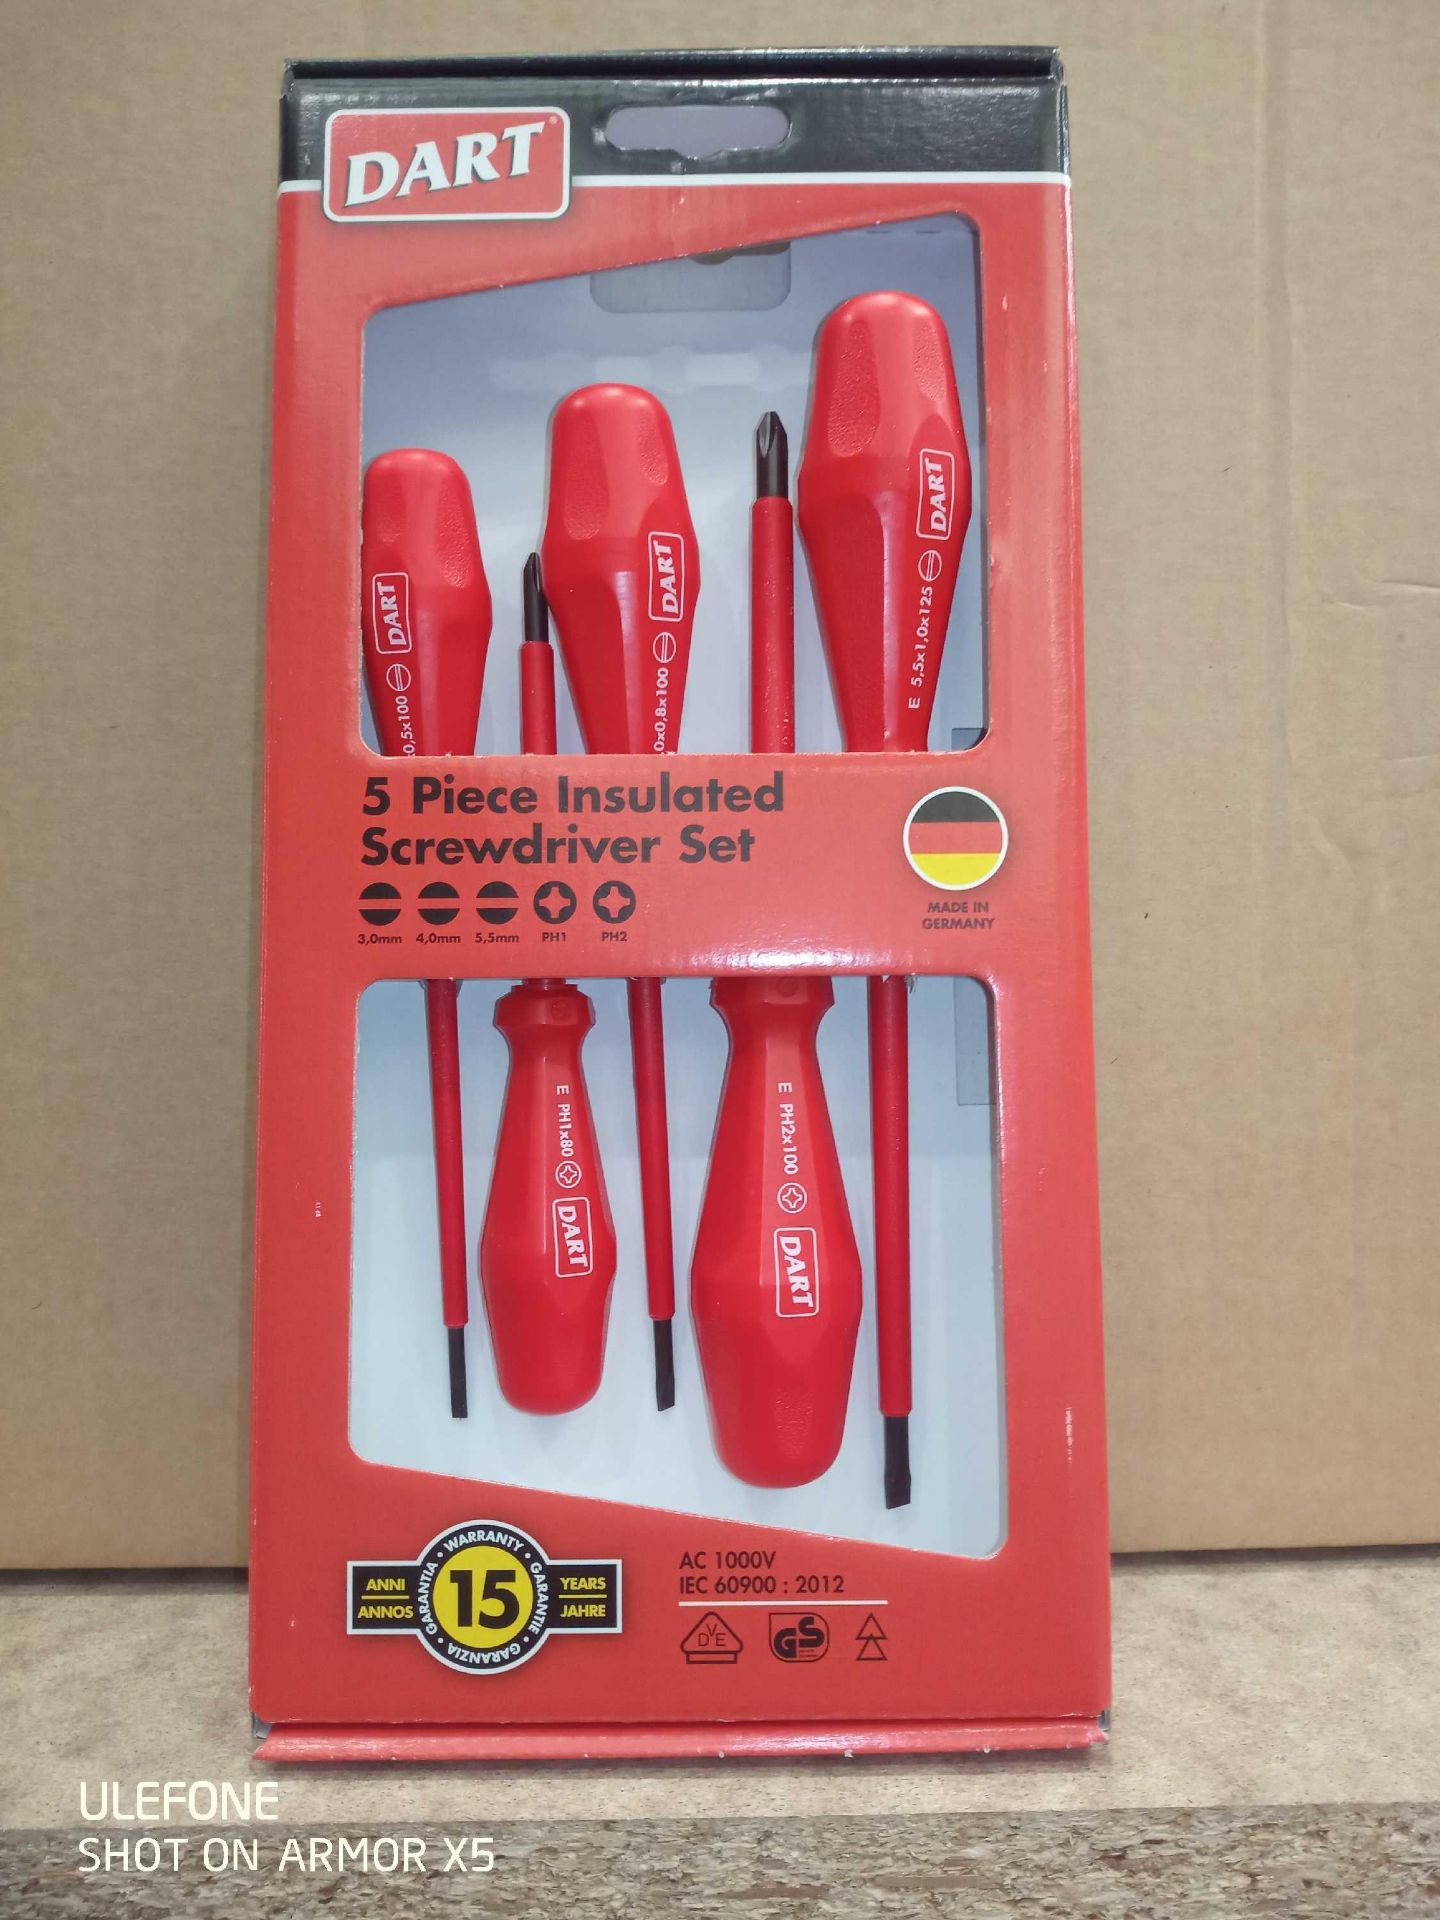 Lot to contain 3 darts 5 piece insulated screwdriver set - Image 2 of 2